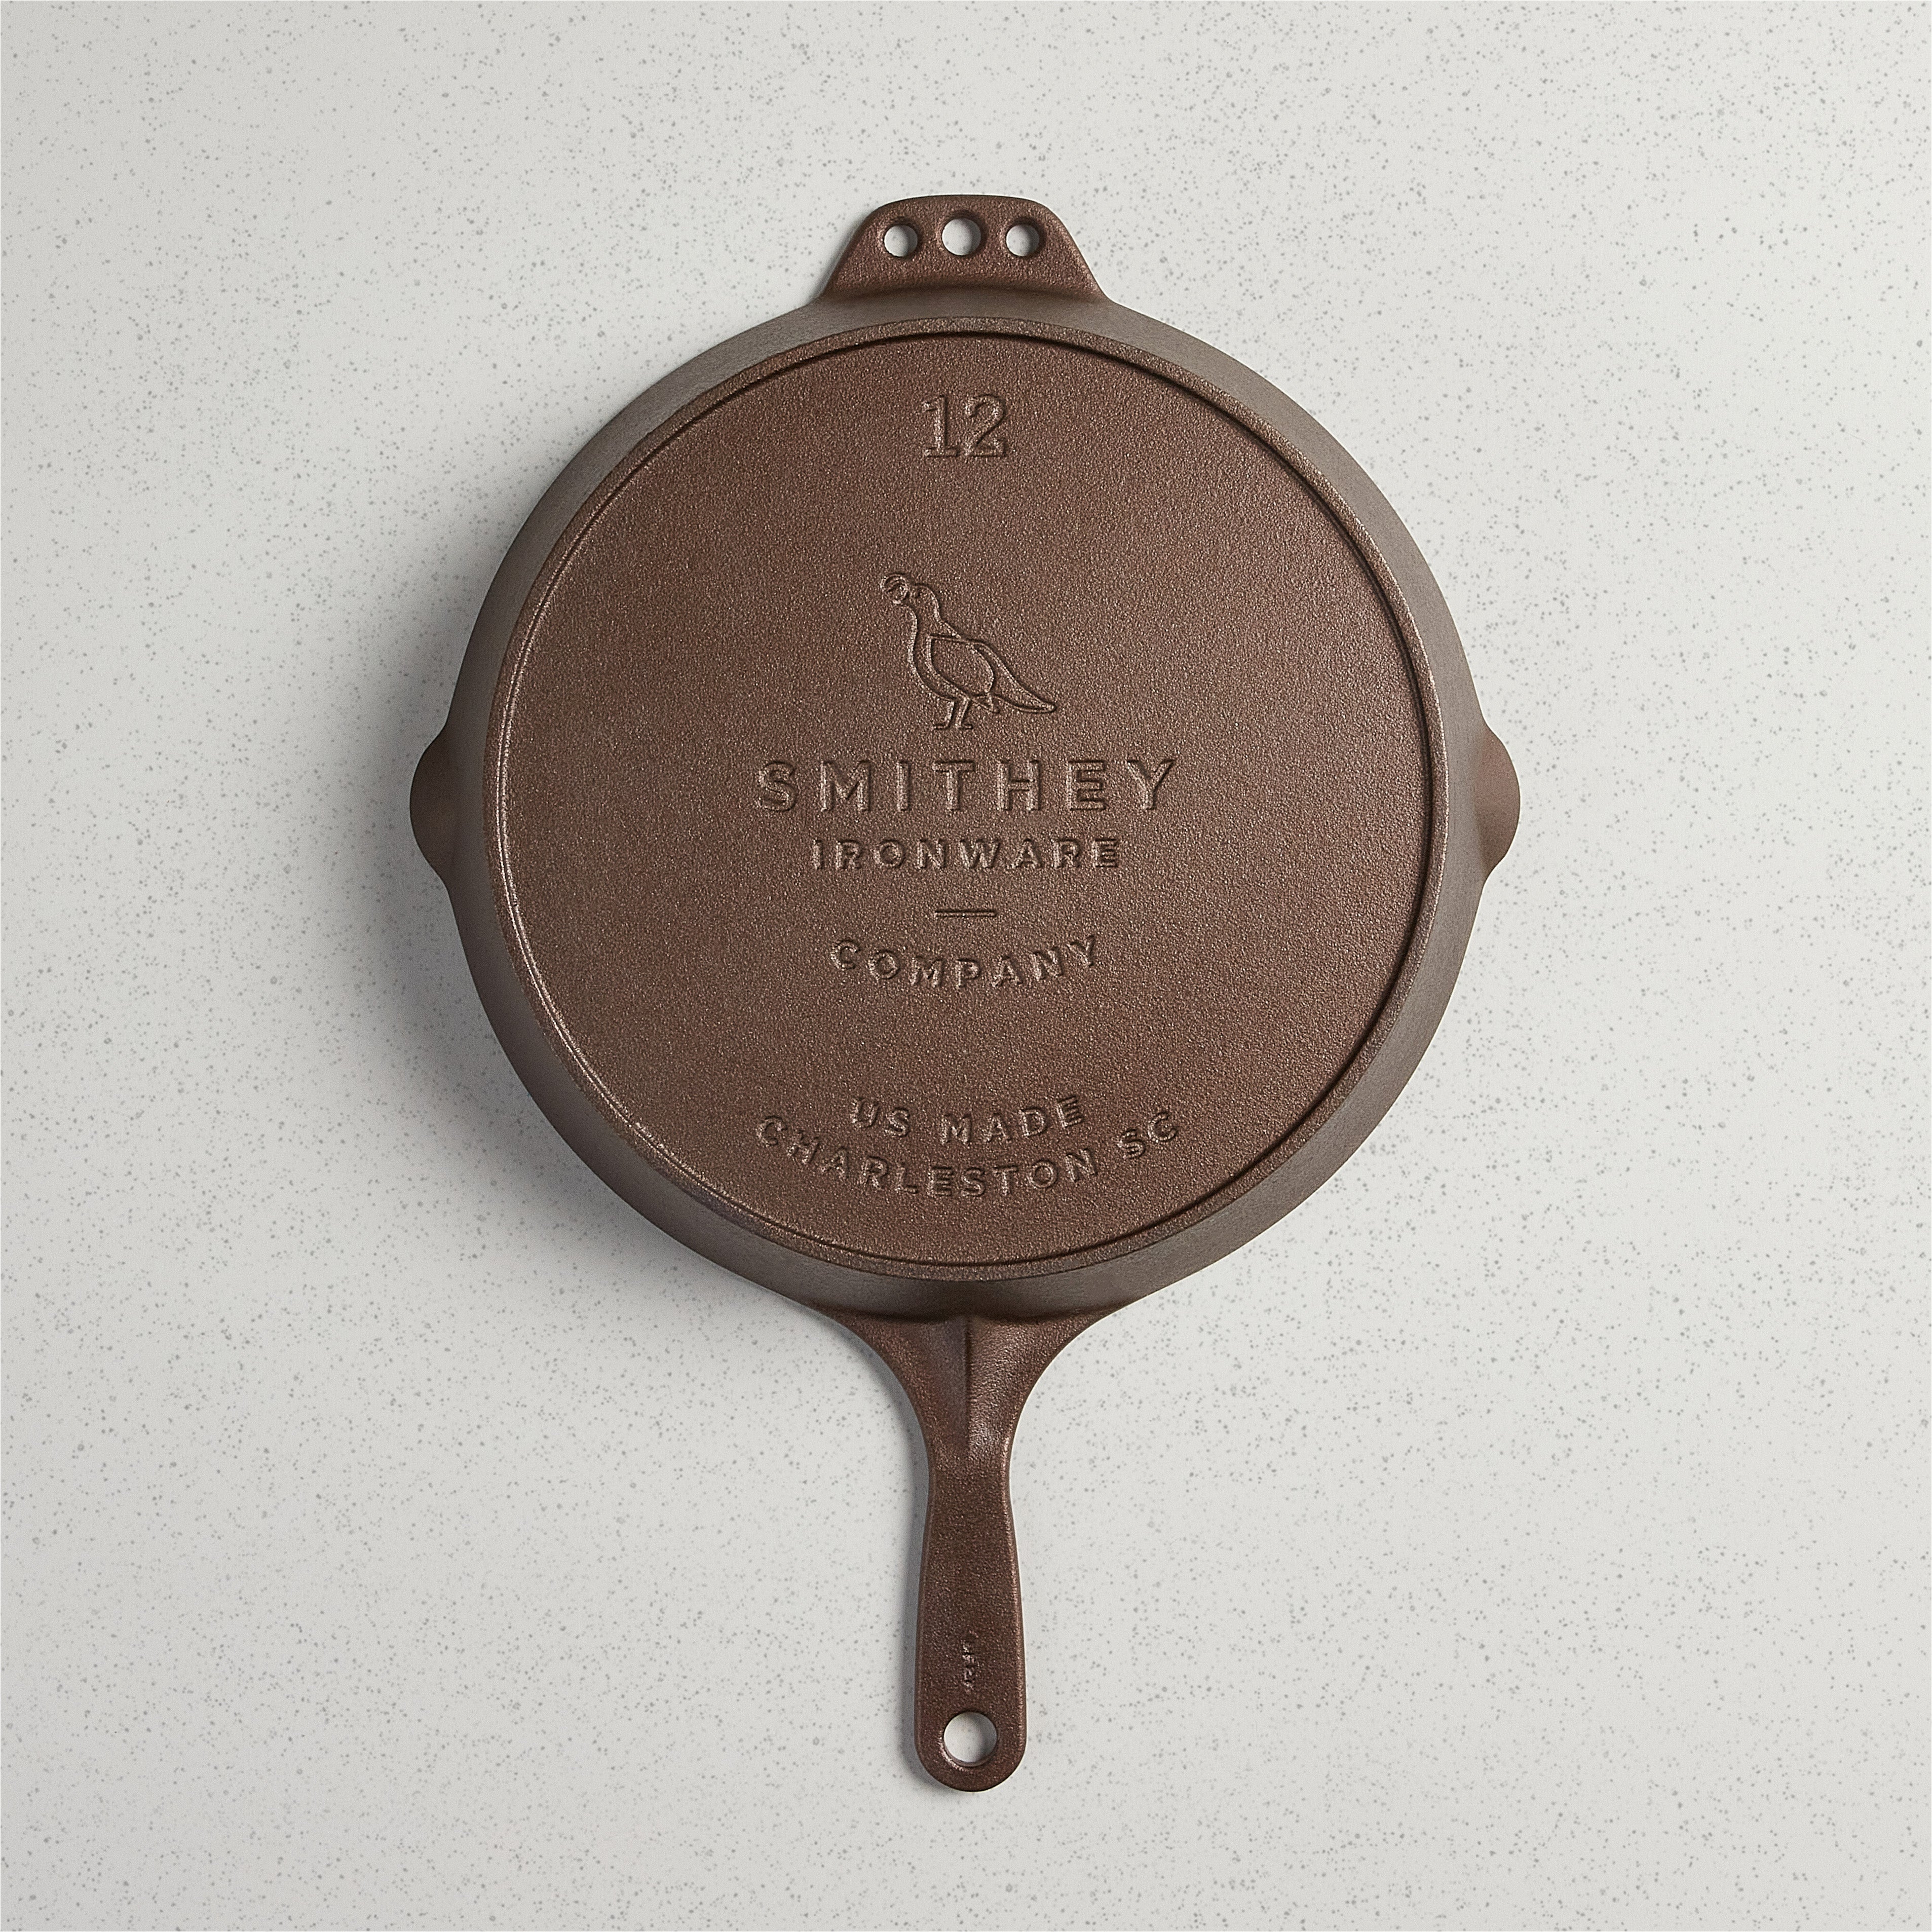 No. 12 Cast Iron Skillet by Smithey Ironware